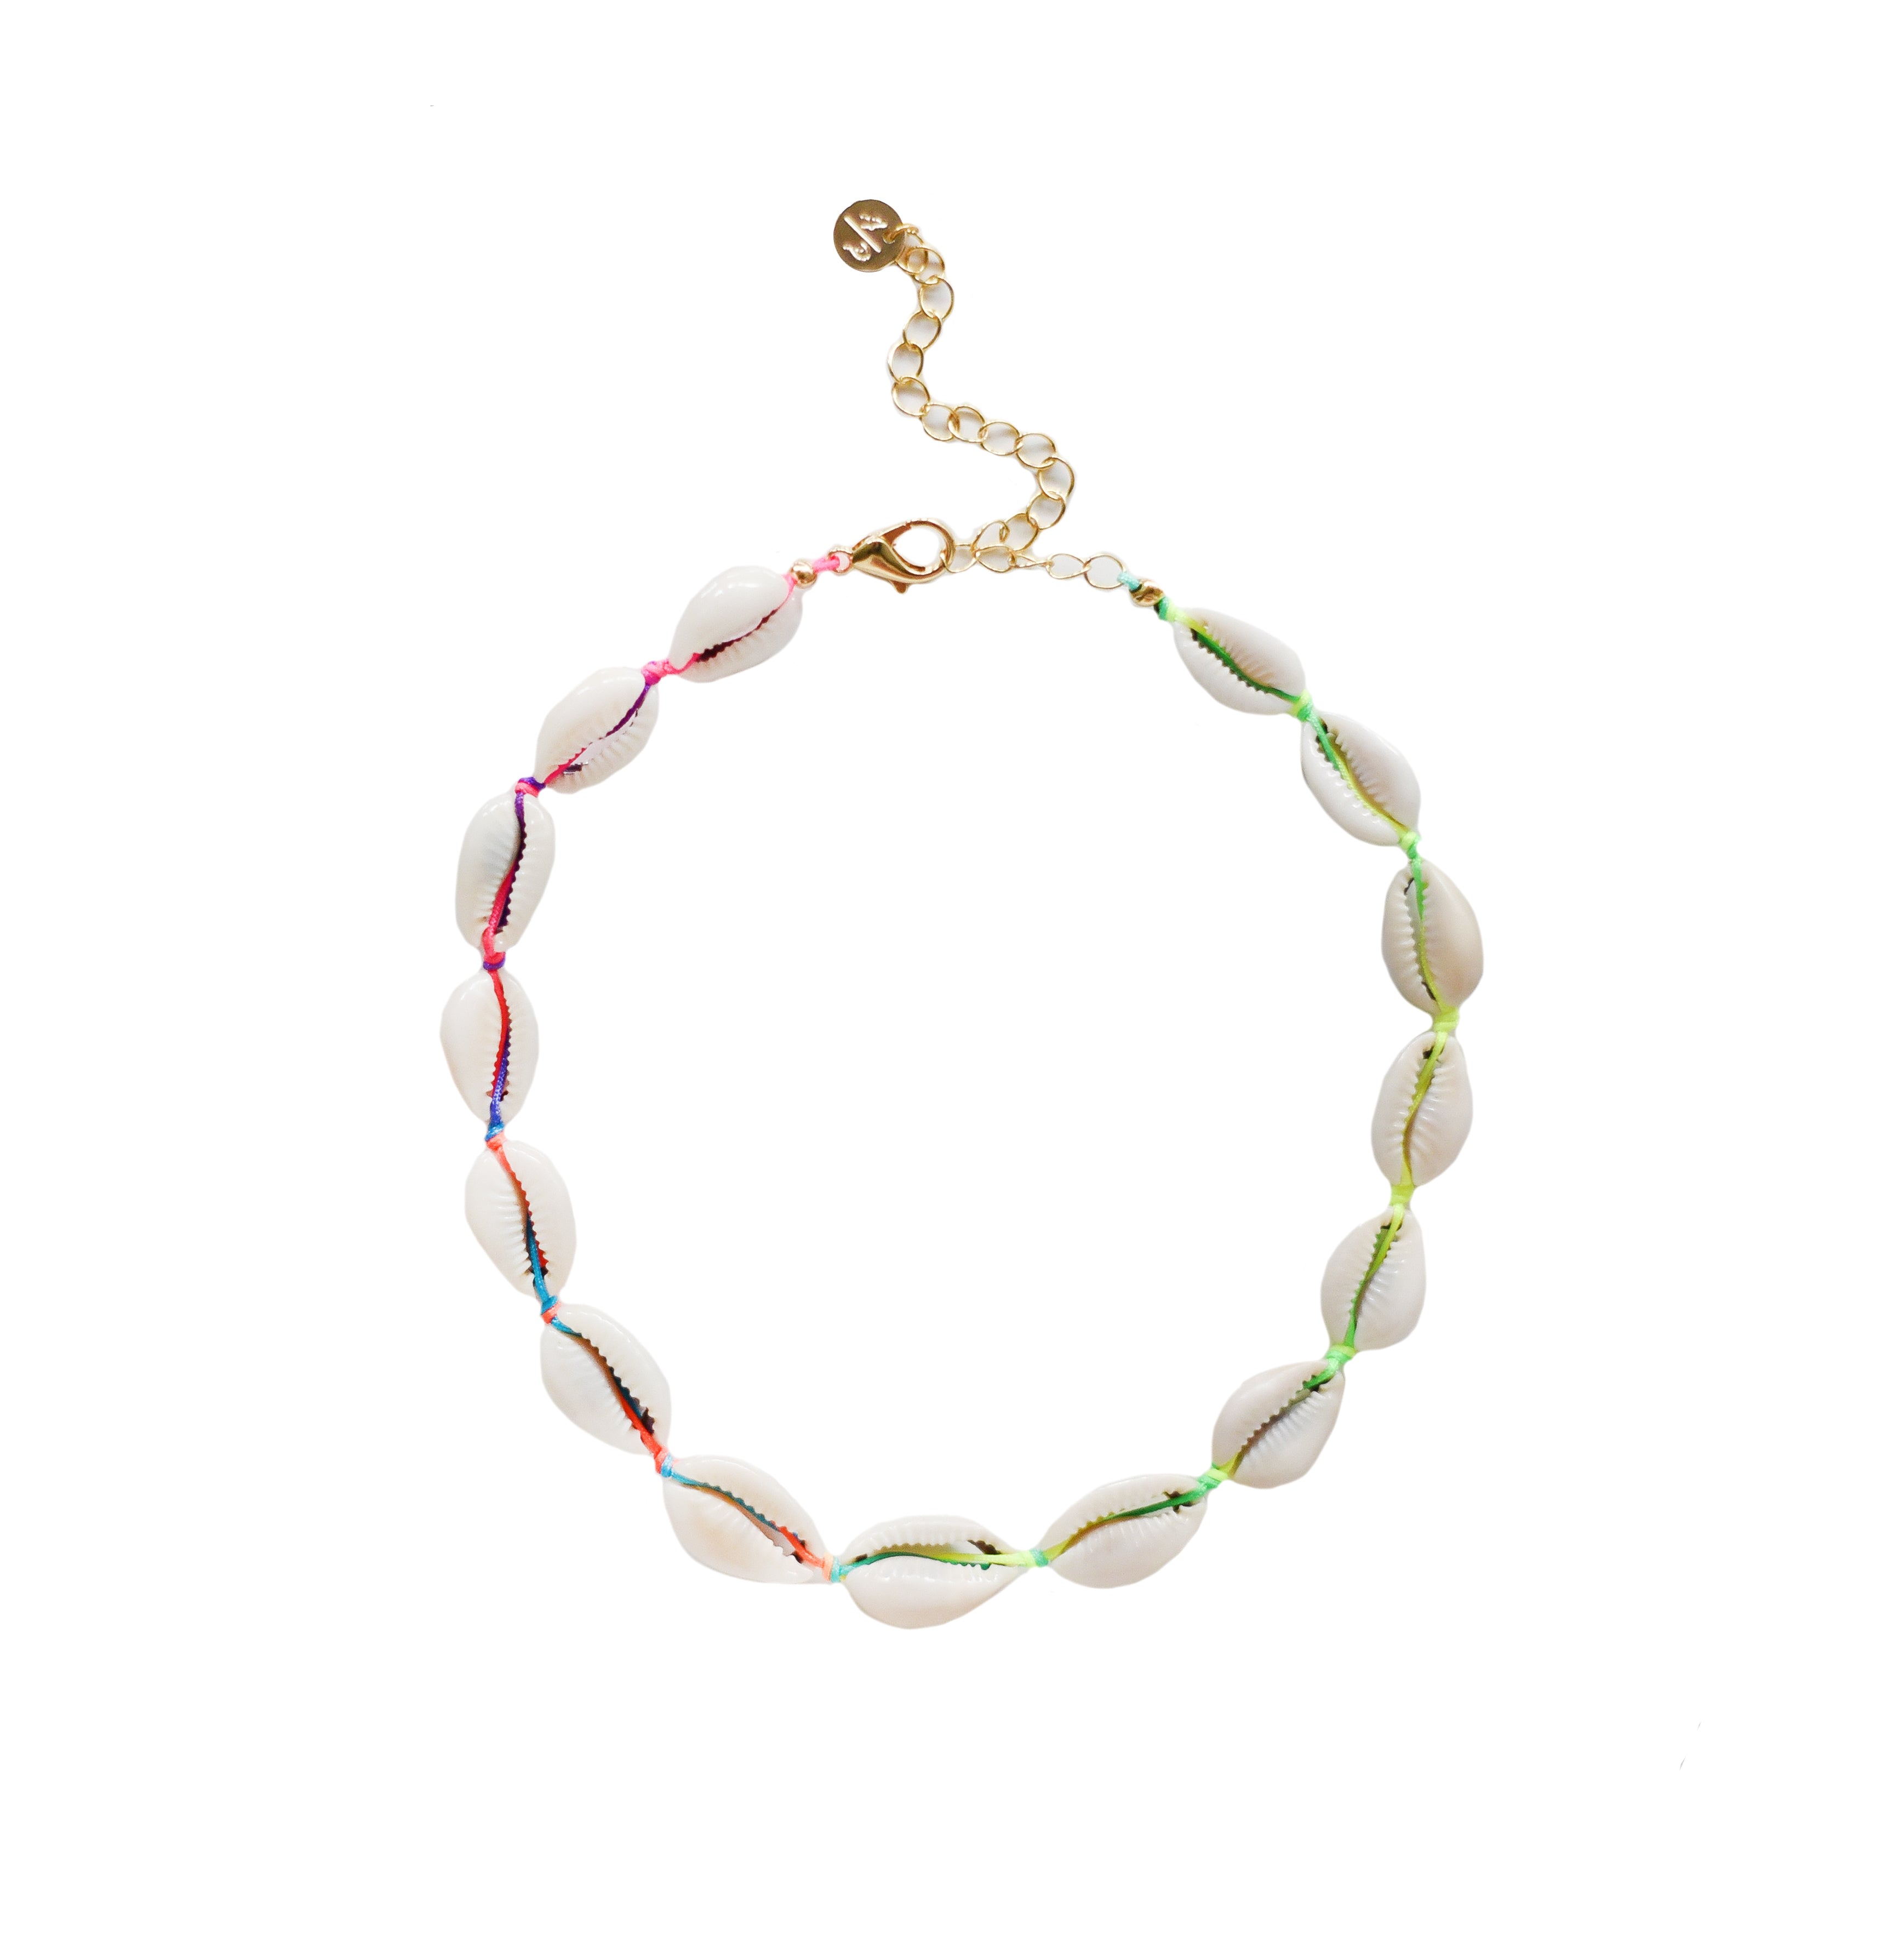 Women’s Mini Natural Shell Choker On Colored Cord - Pastel Tie Dye Adriana Pappas Designs